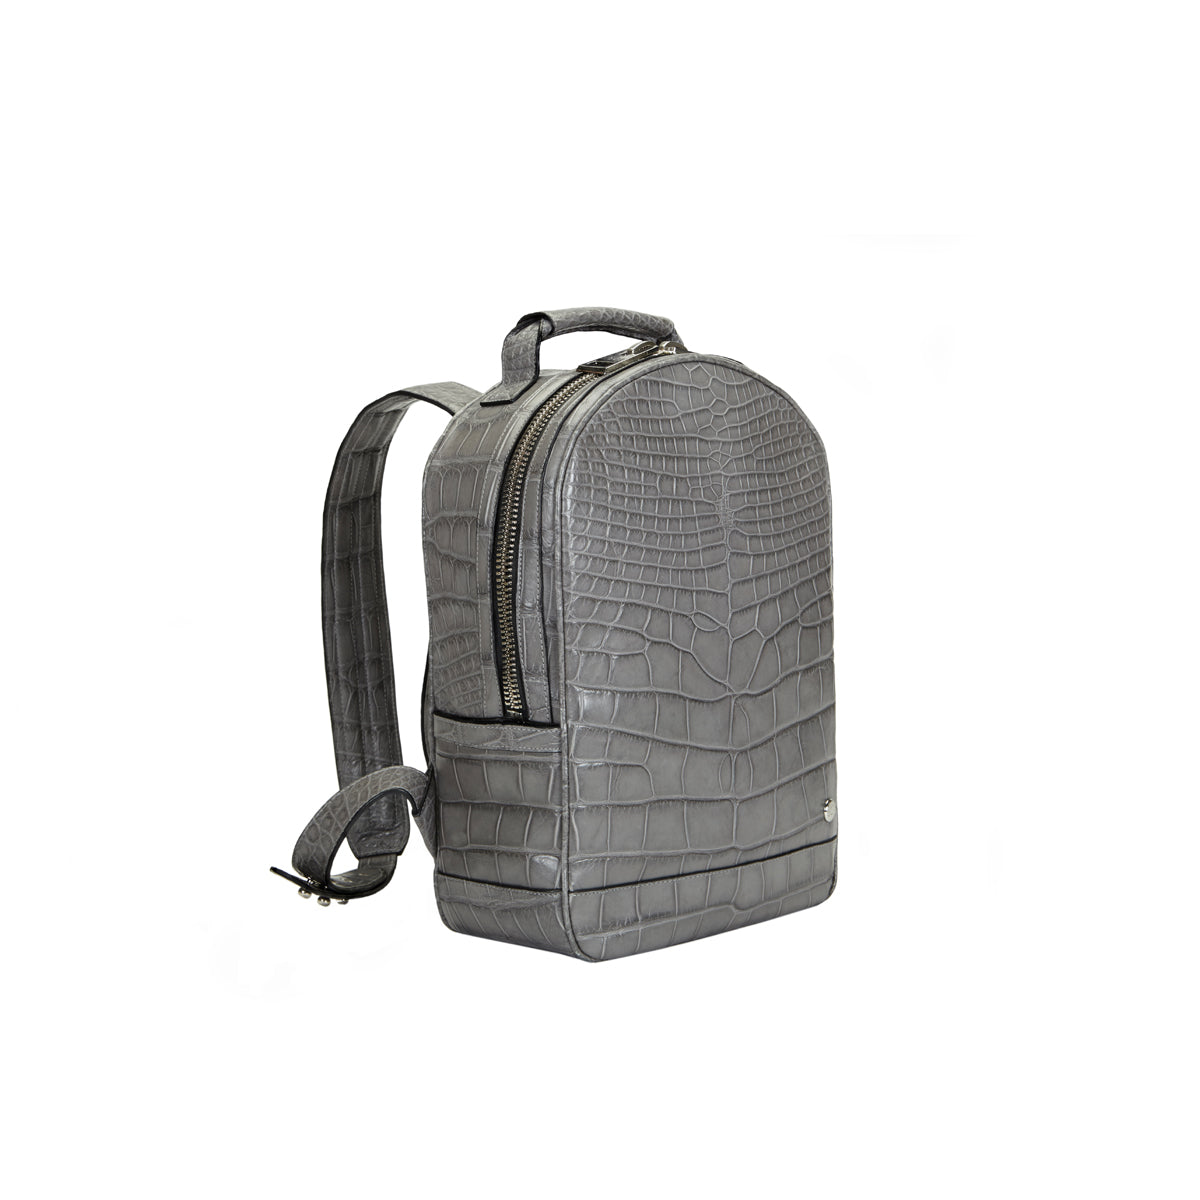 STALVEY Brighton Flat Front Backpack in Medium Grey Alligator Front View